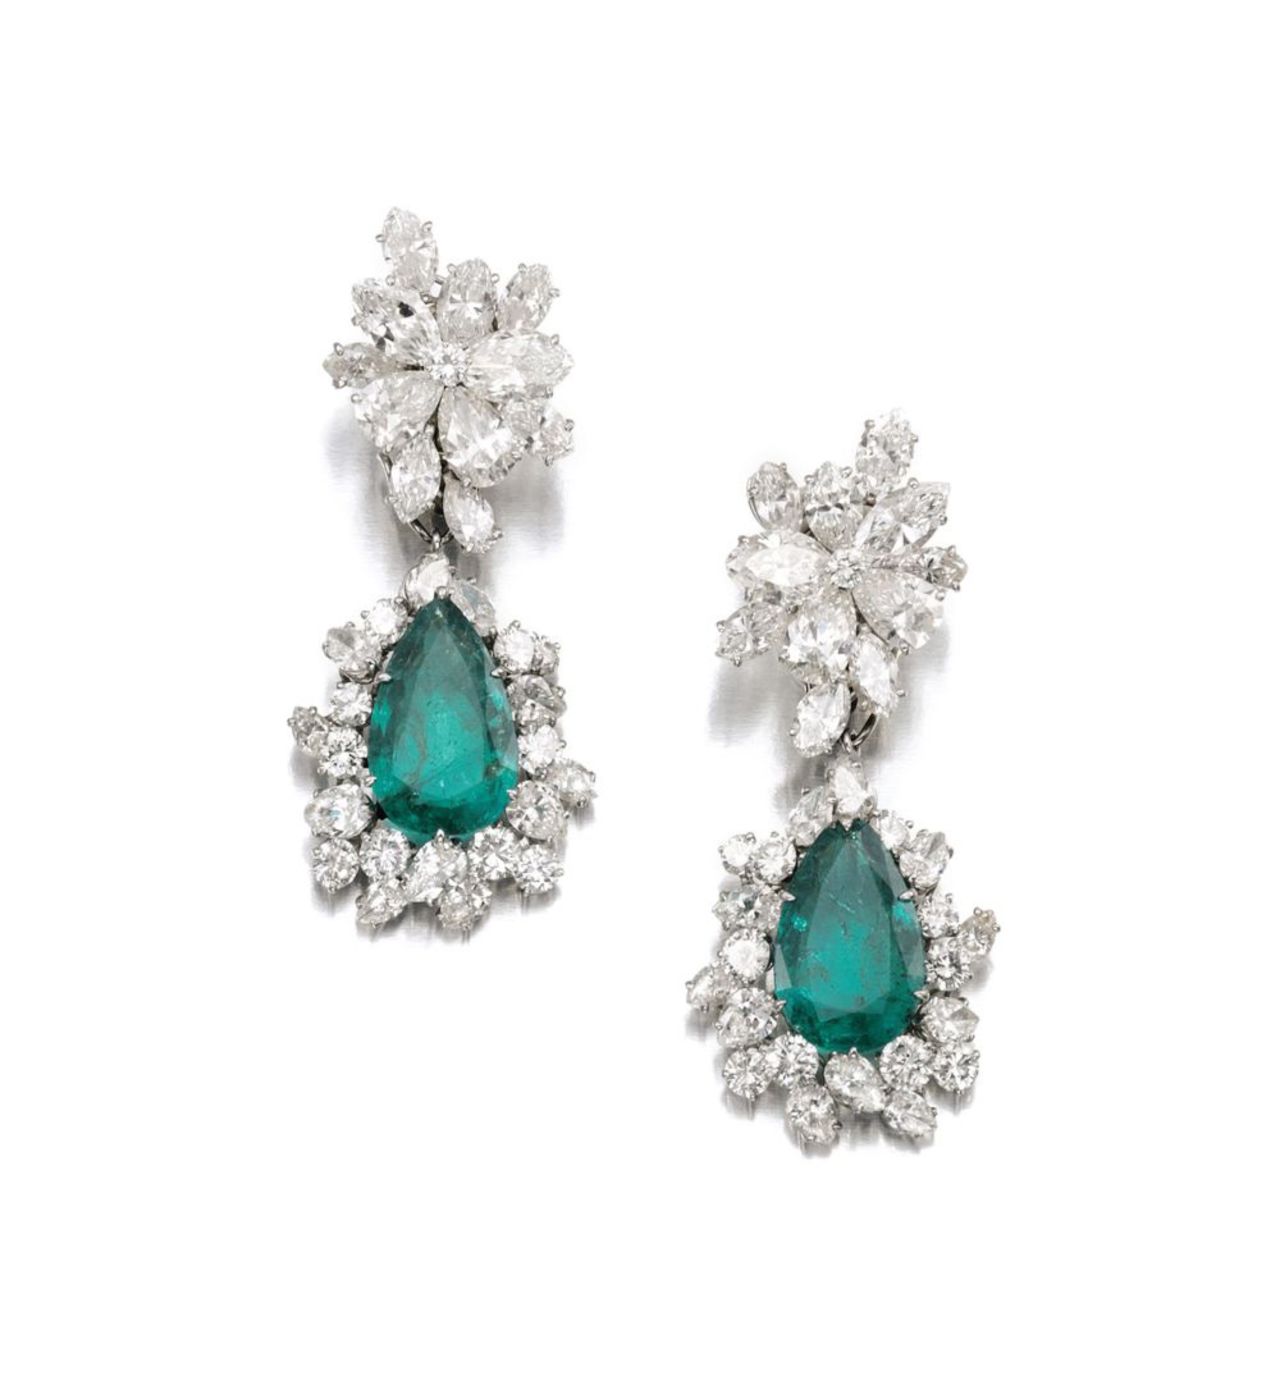 The intricate emerald and diamond earrings were made by the Italian jeweler Bulgari in 1964, and were auctioned by Sotheby's in May.